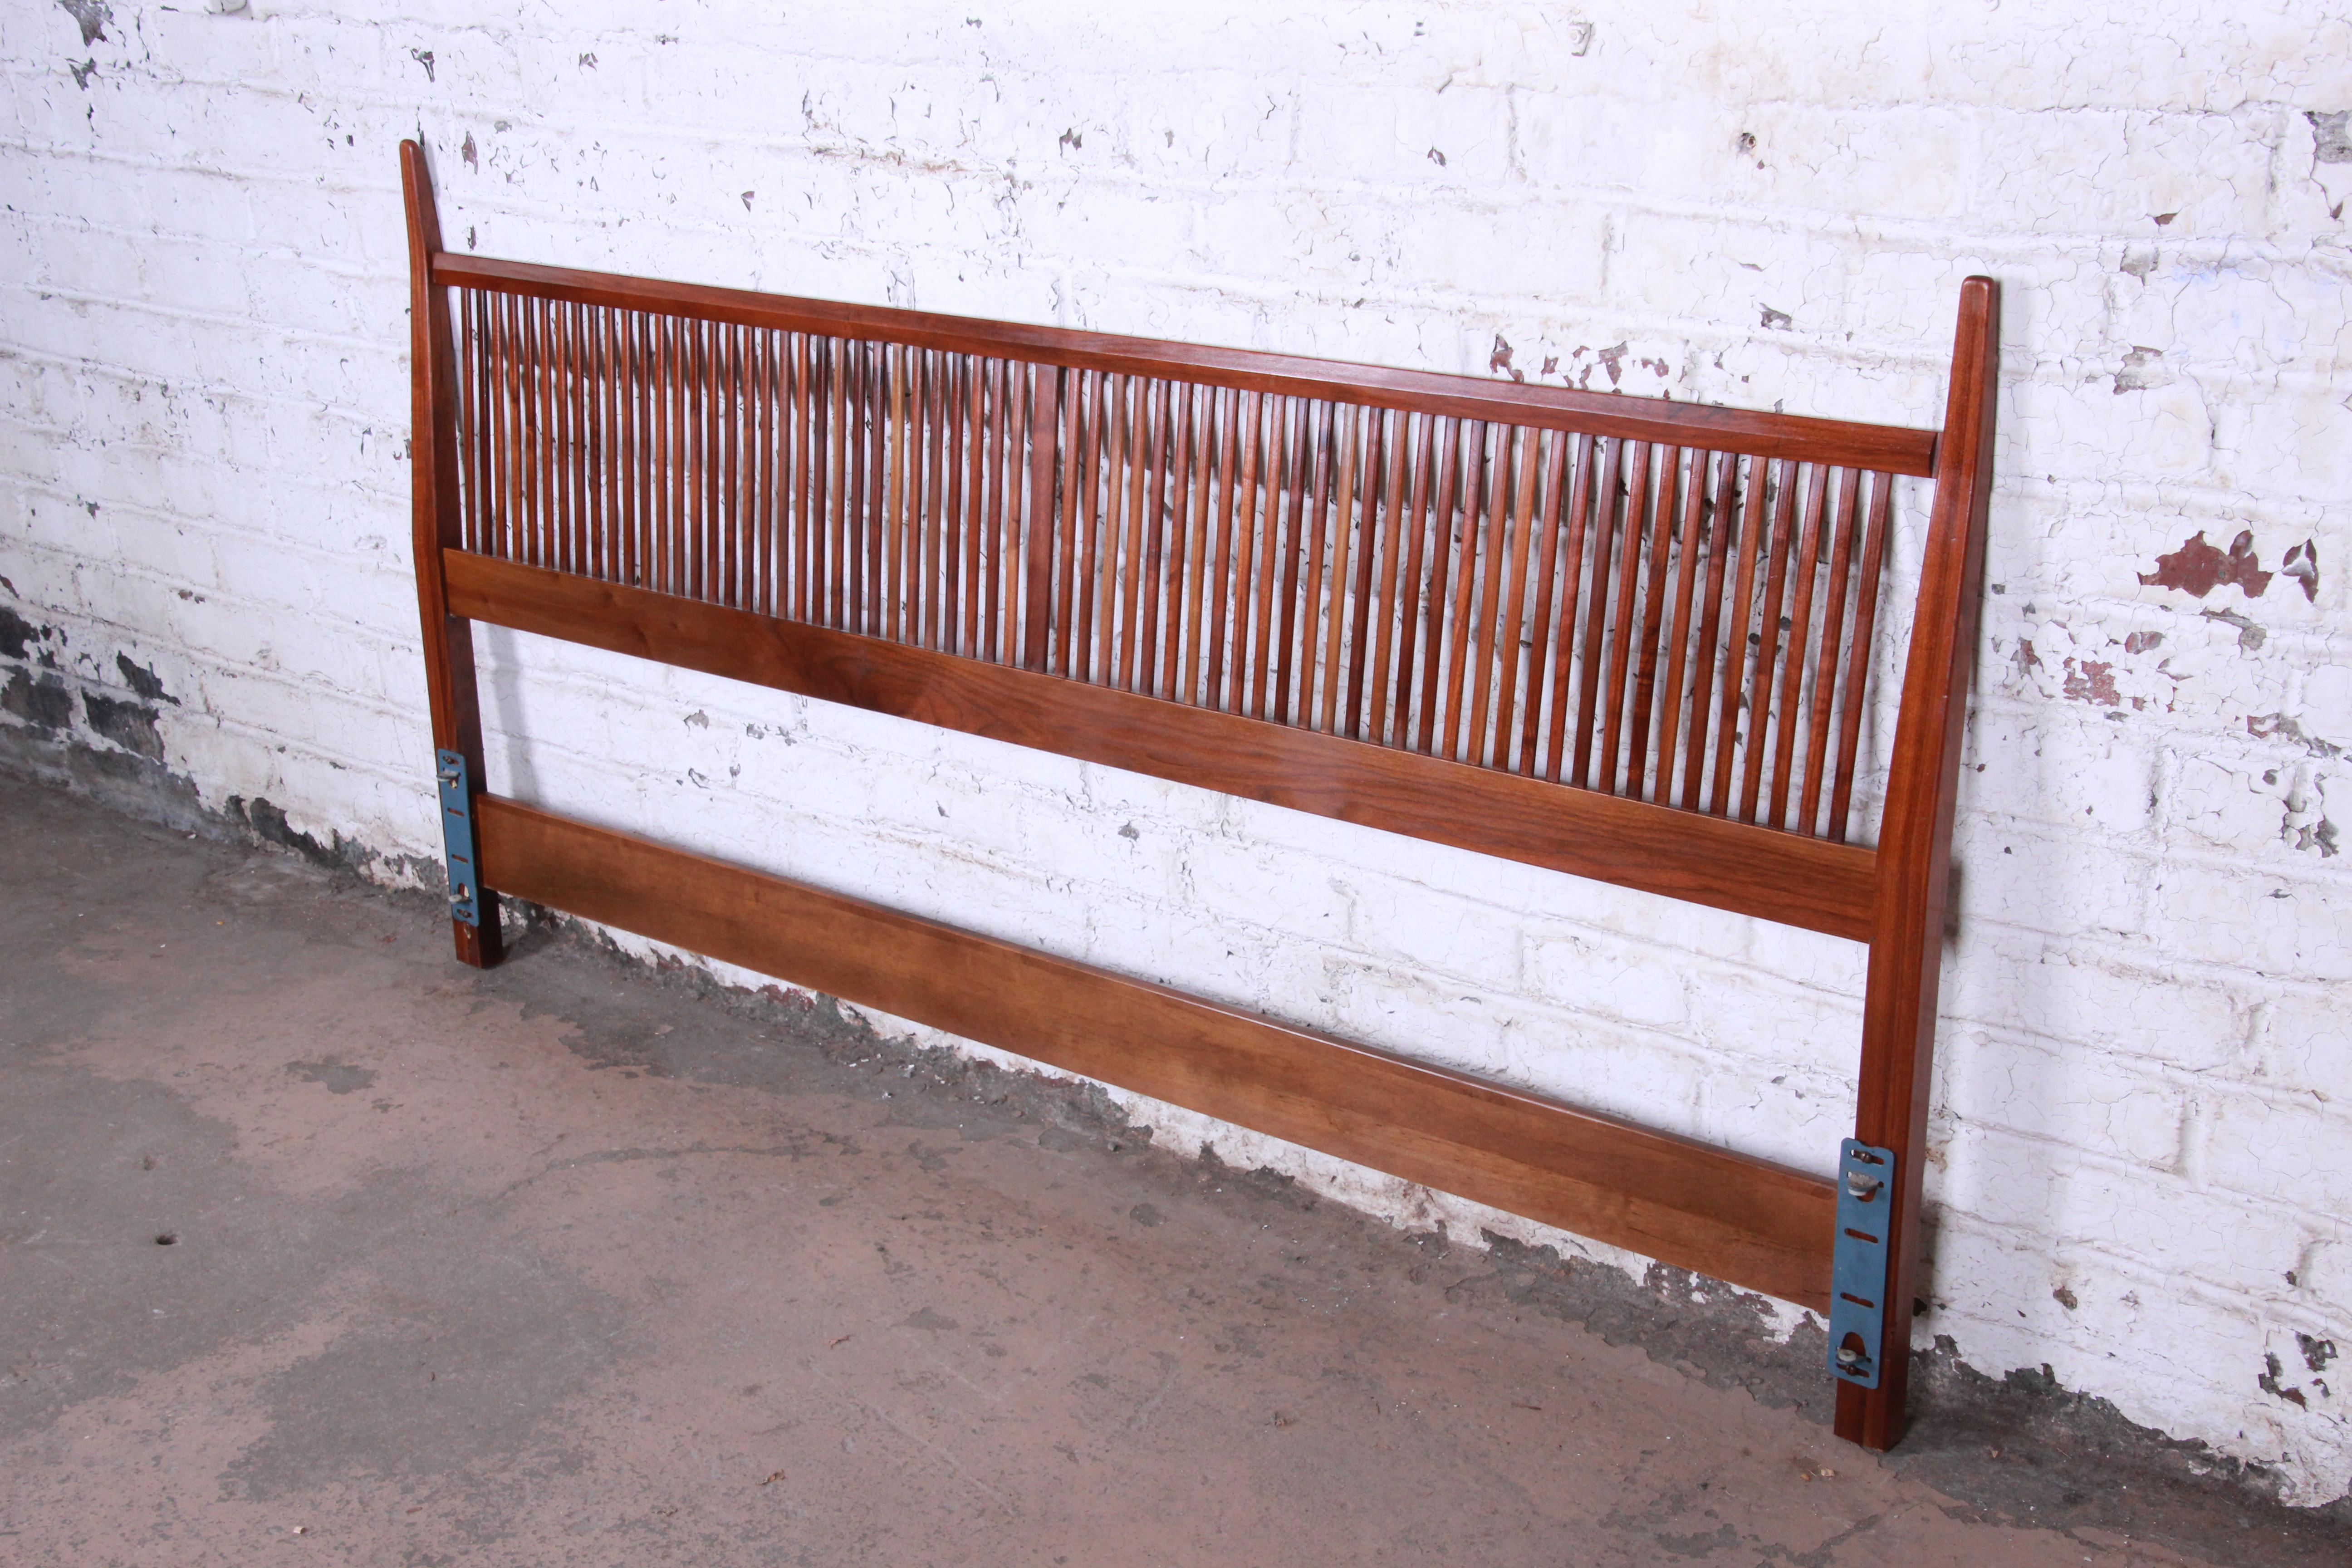 An exceptional Mid-Century Modern sculpted walnut king size headboard. The headboard was designed by Kipp Stewart for his American design foundation line for directional and produced by Calvin Furniture. It features solid walnut construction with